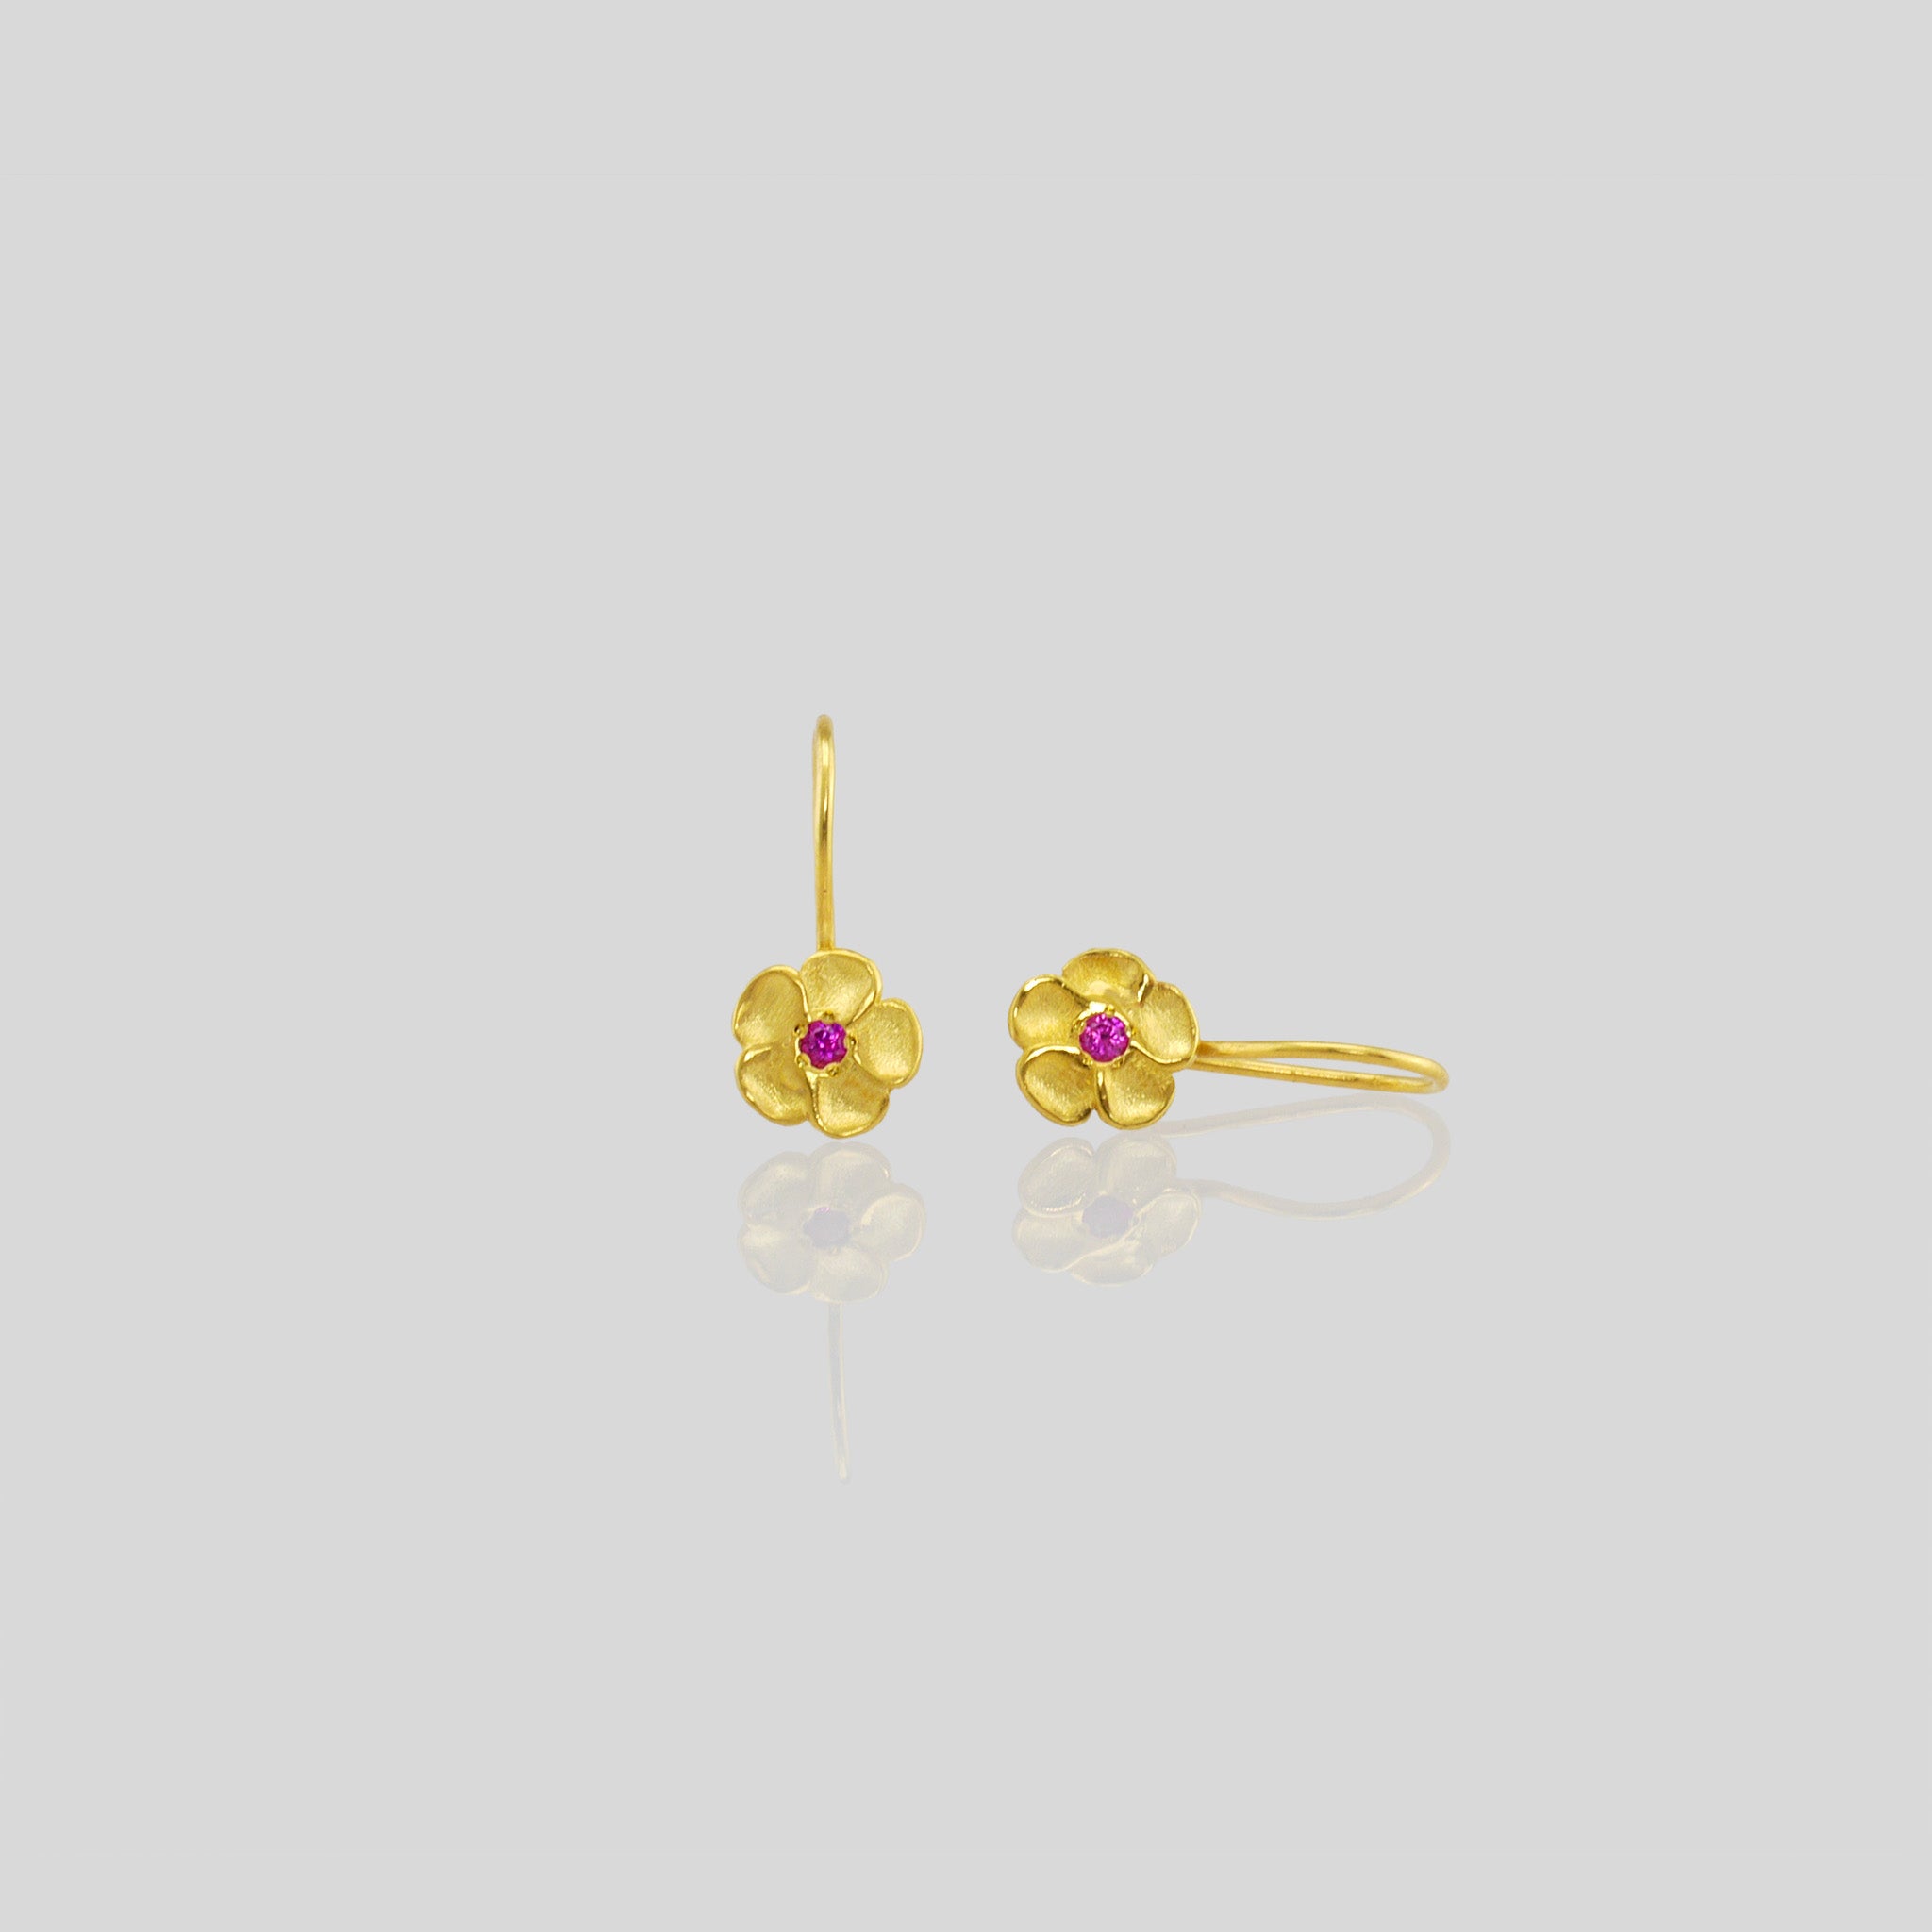 Delicate yellow gold flower drop earrings with a sparkling ruby center. Perfect for any occasion!